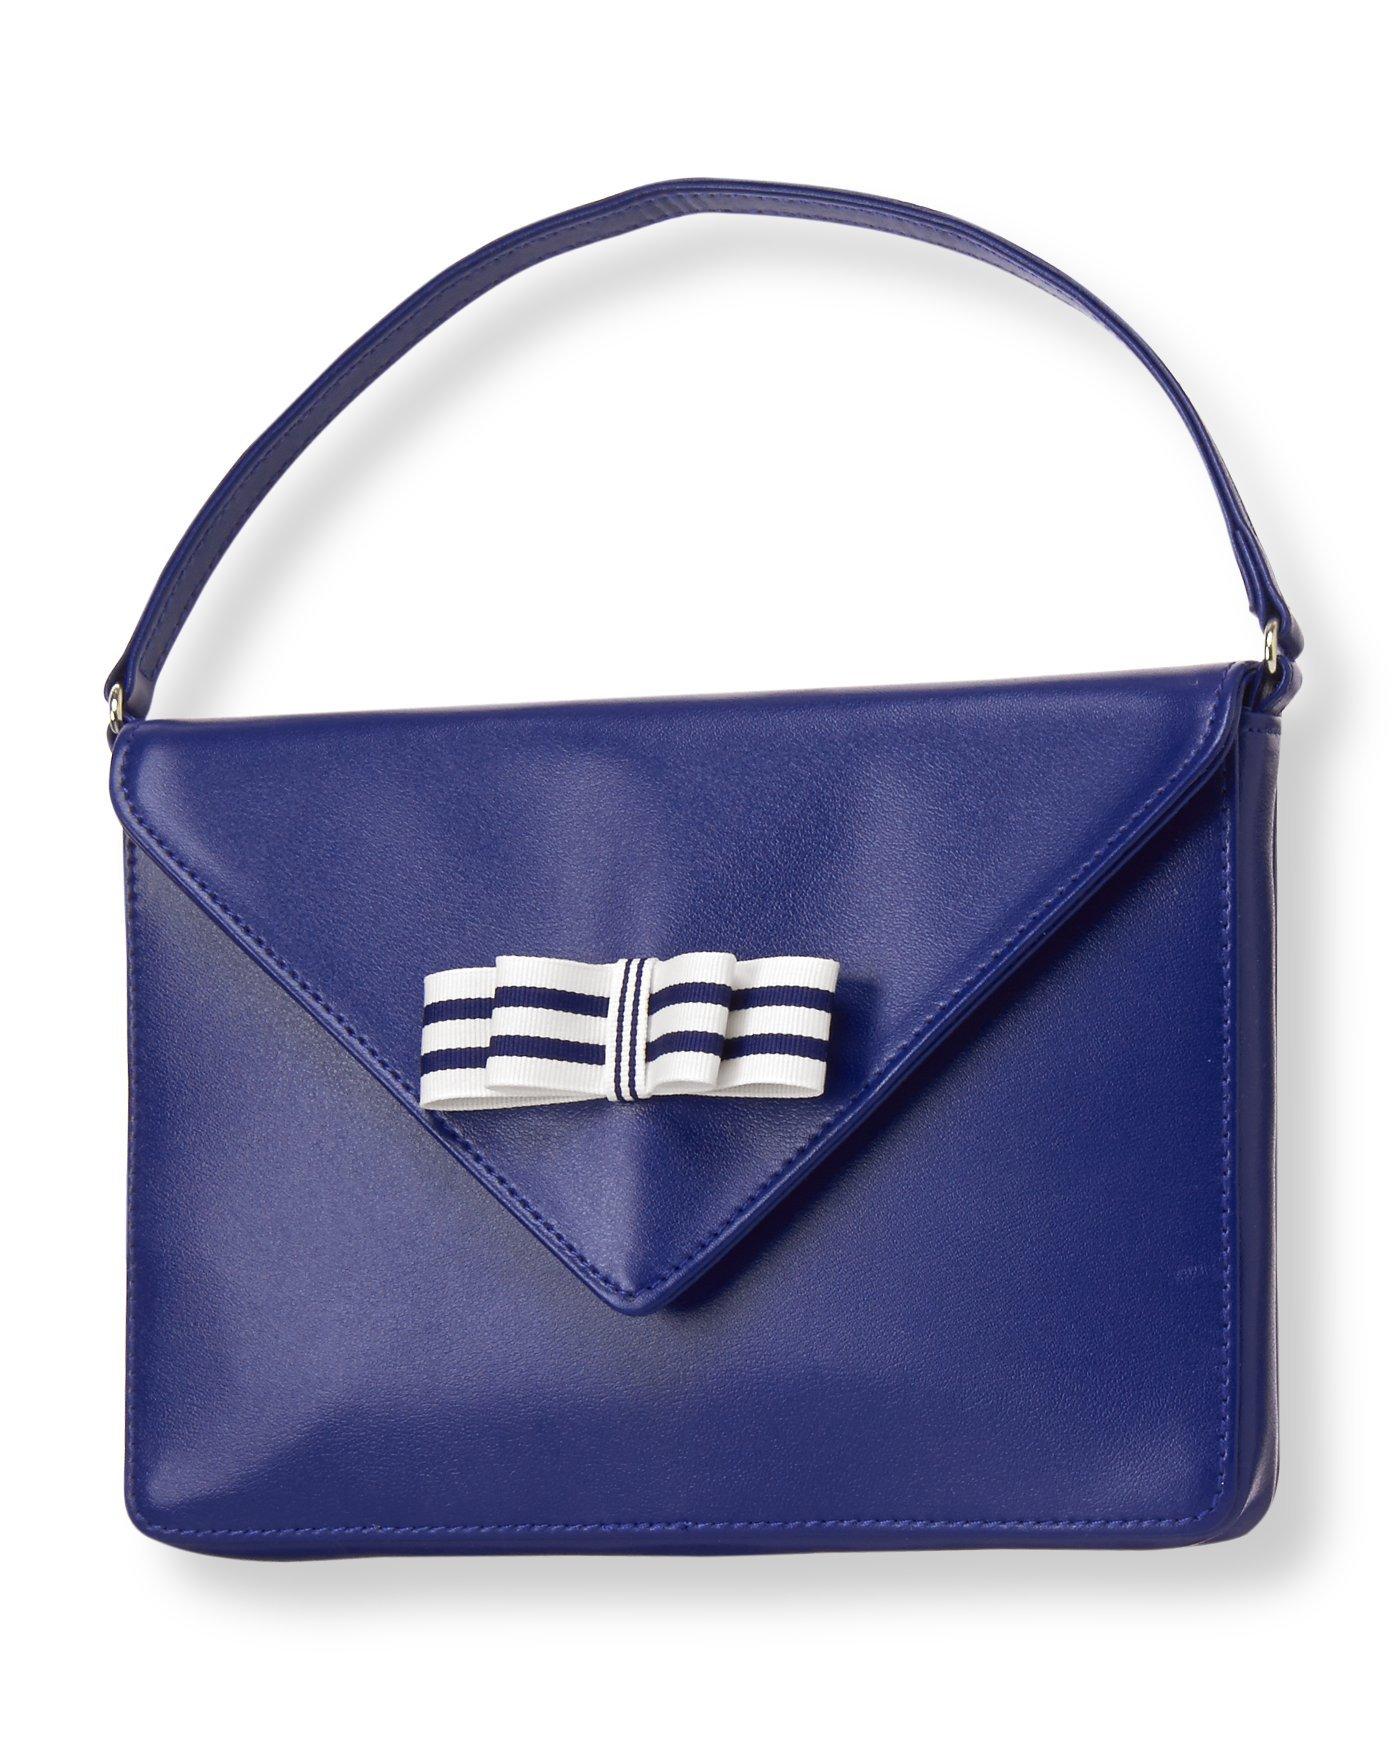 Striped Bow Purse image number 0